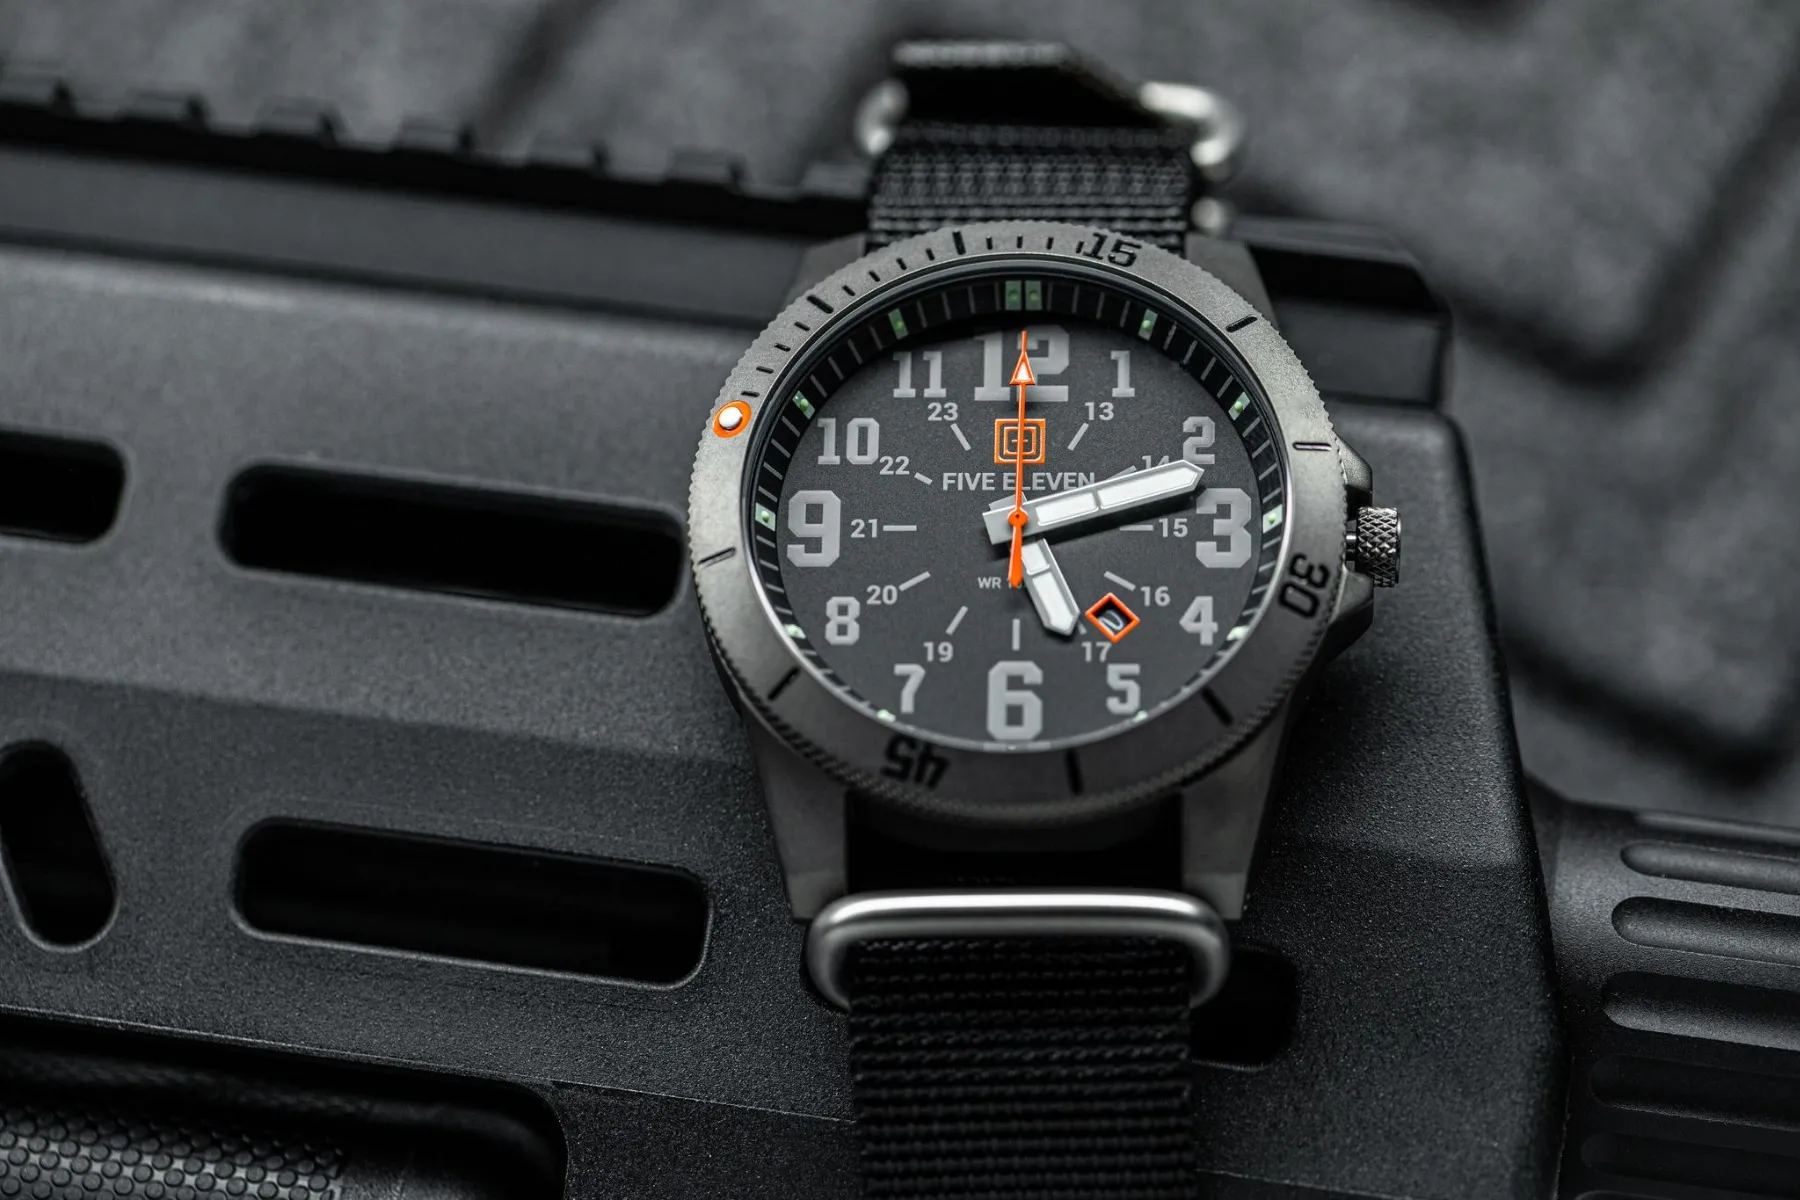 Tactical Watches You Can Depend On